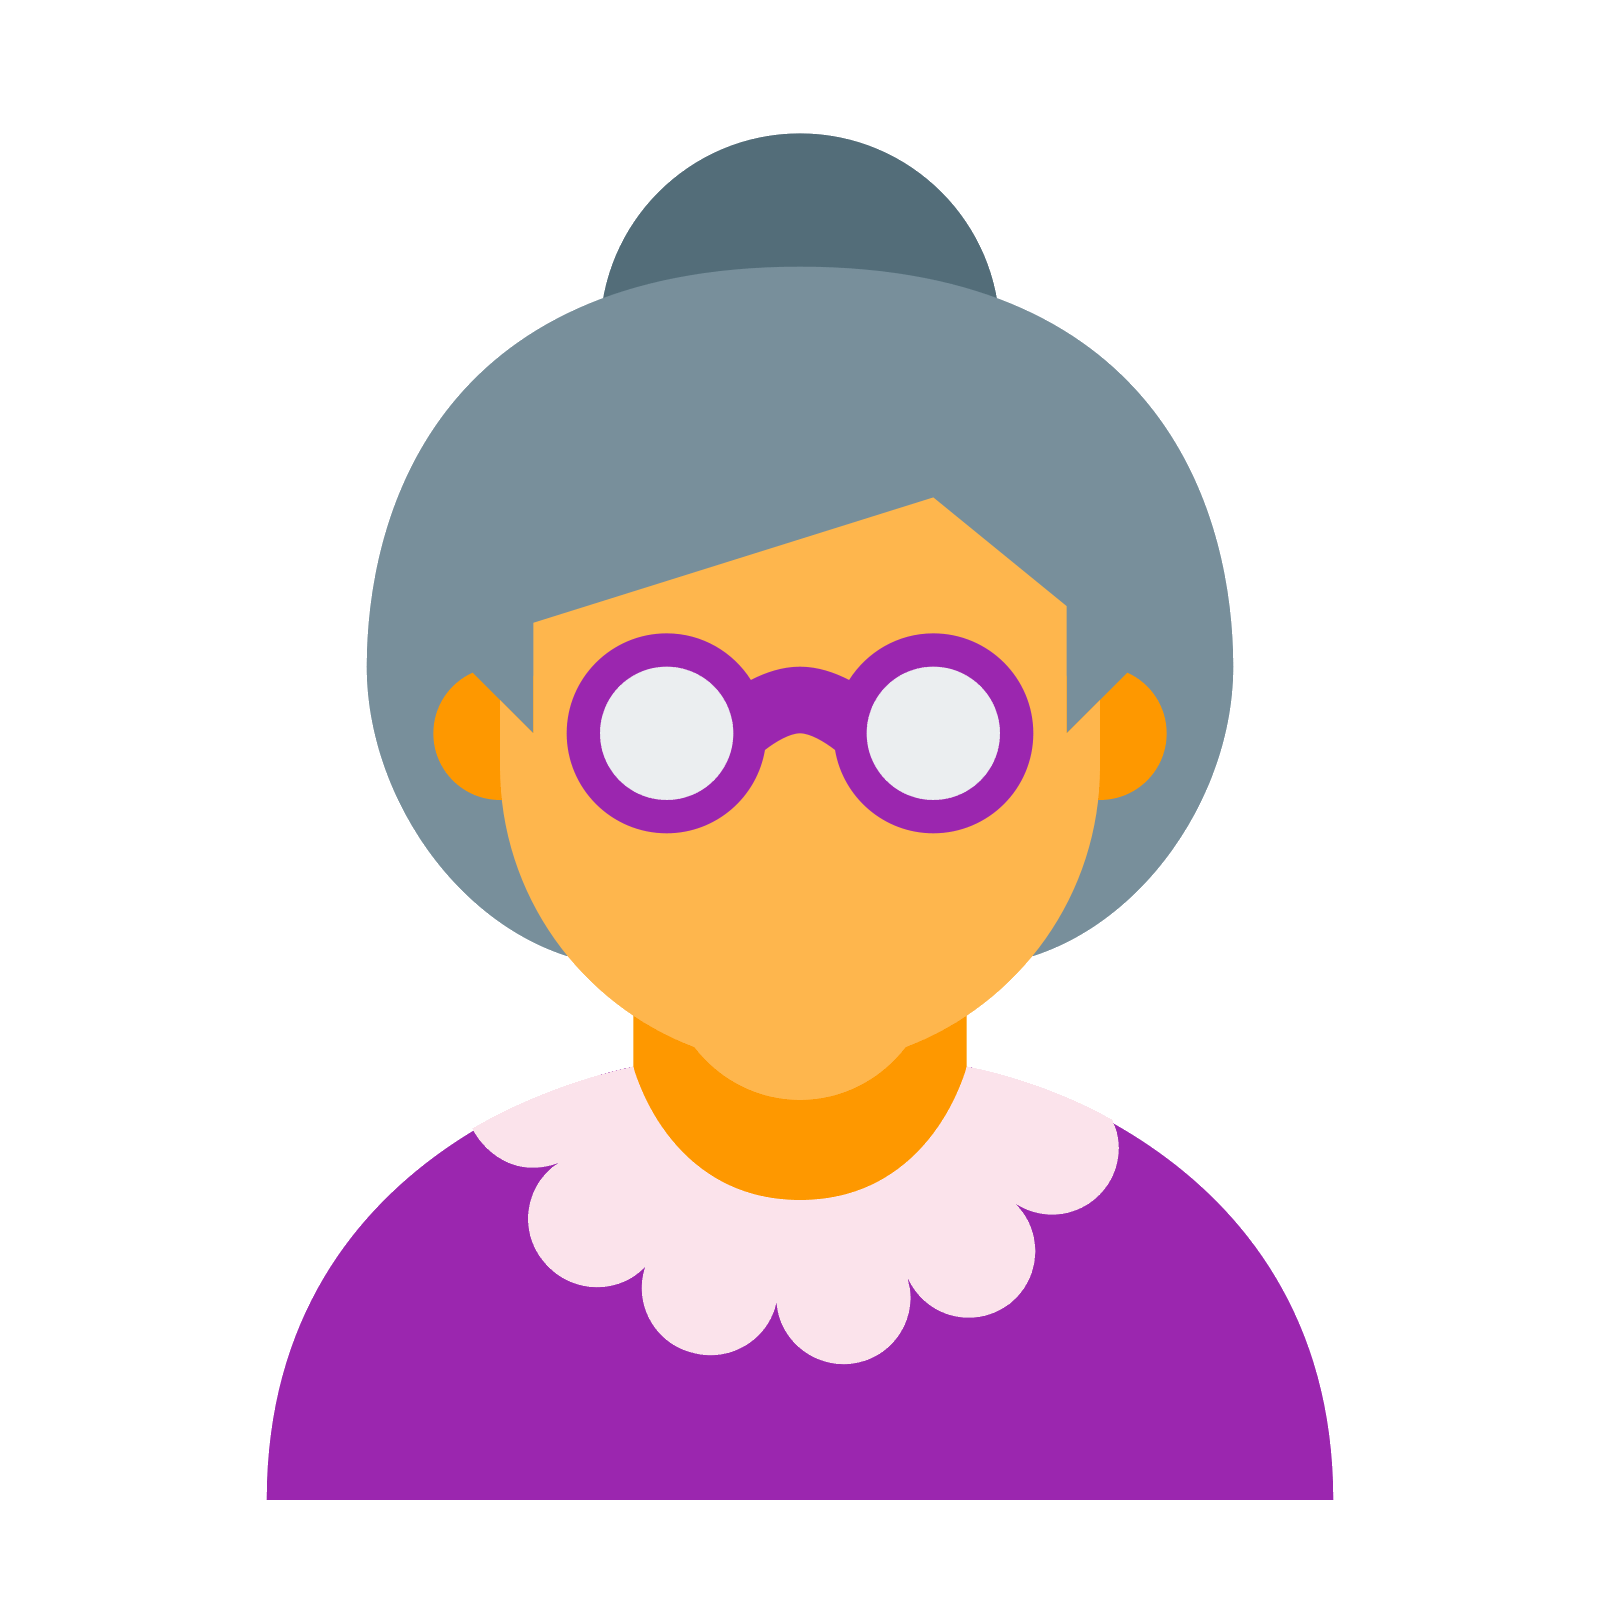 Old lady icon free. Goggles clipart women's